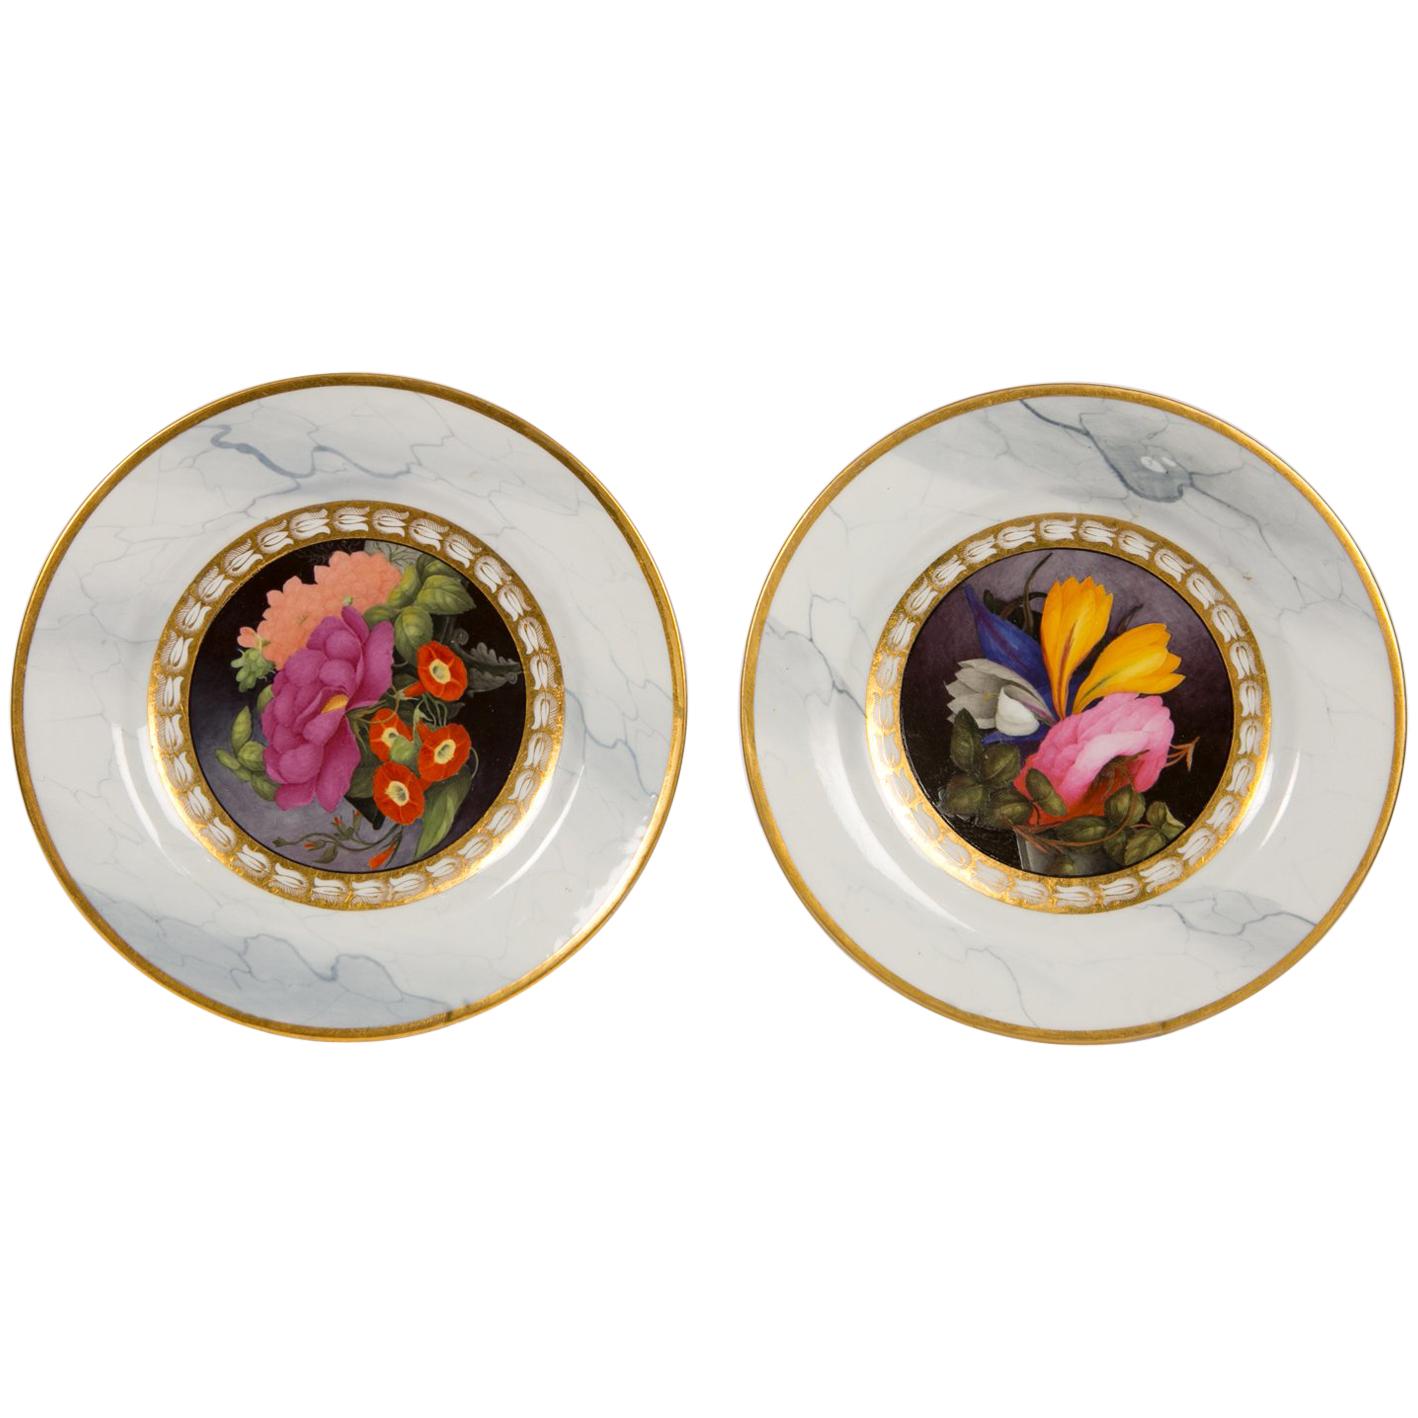 Pair of Worcester Marbled Plates with Flowers Made in England Circa 1810